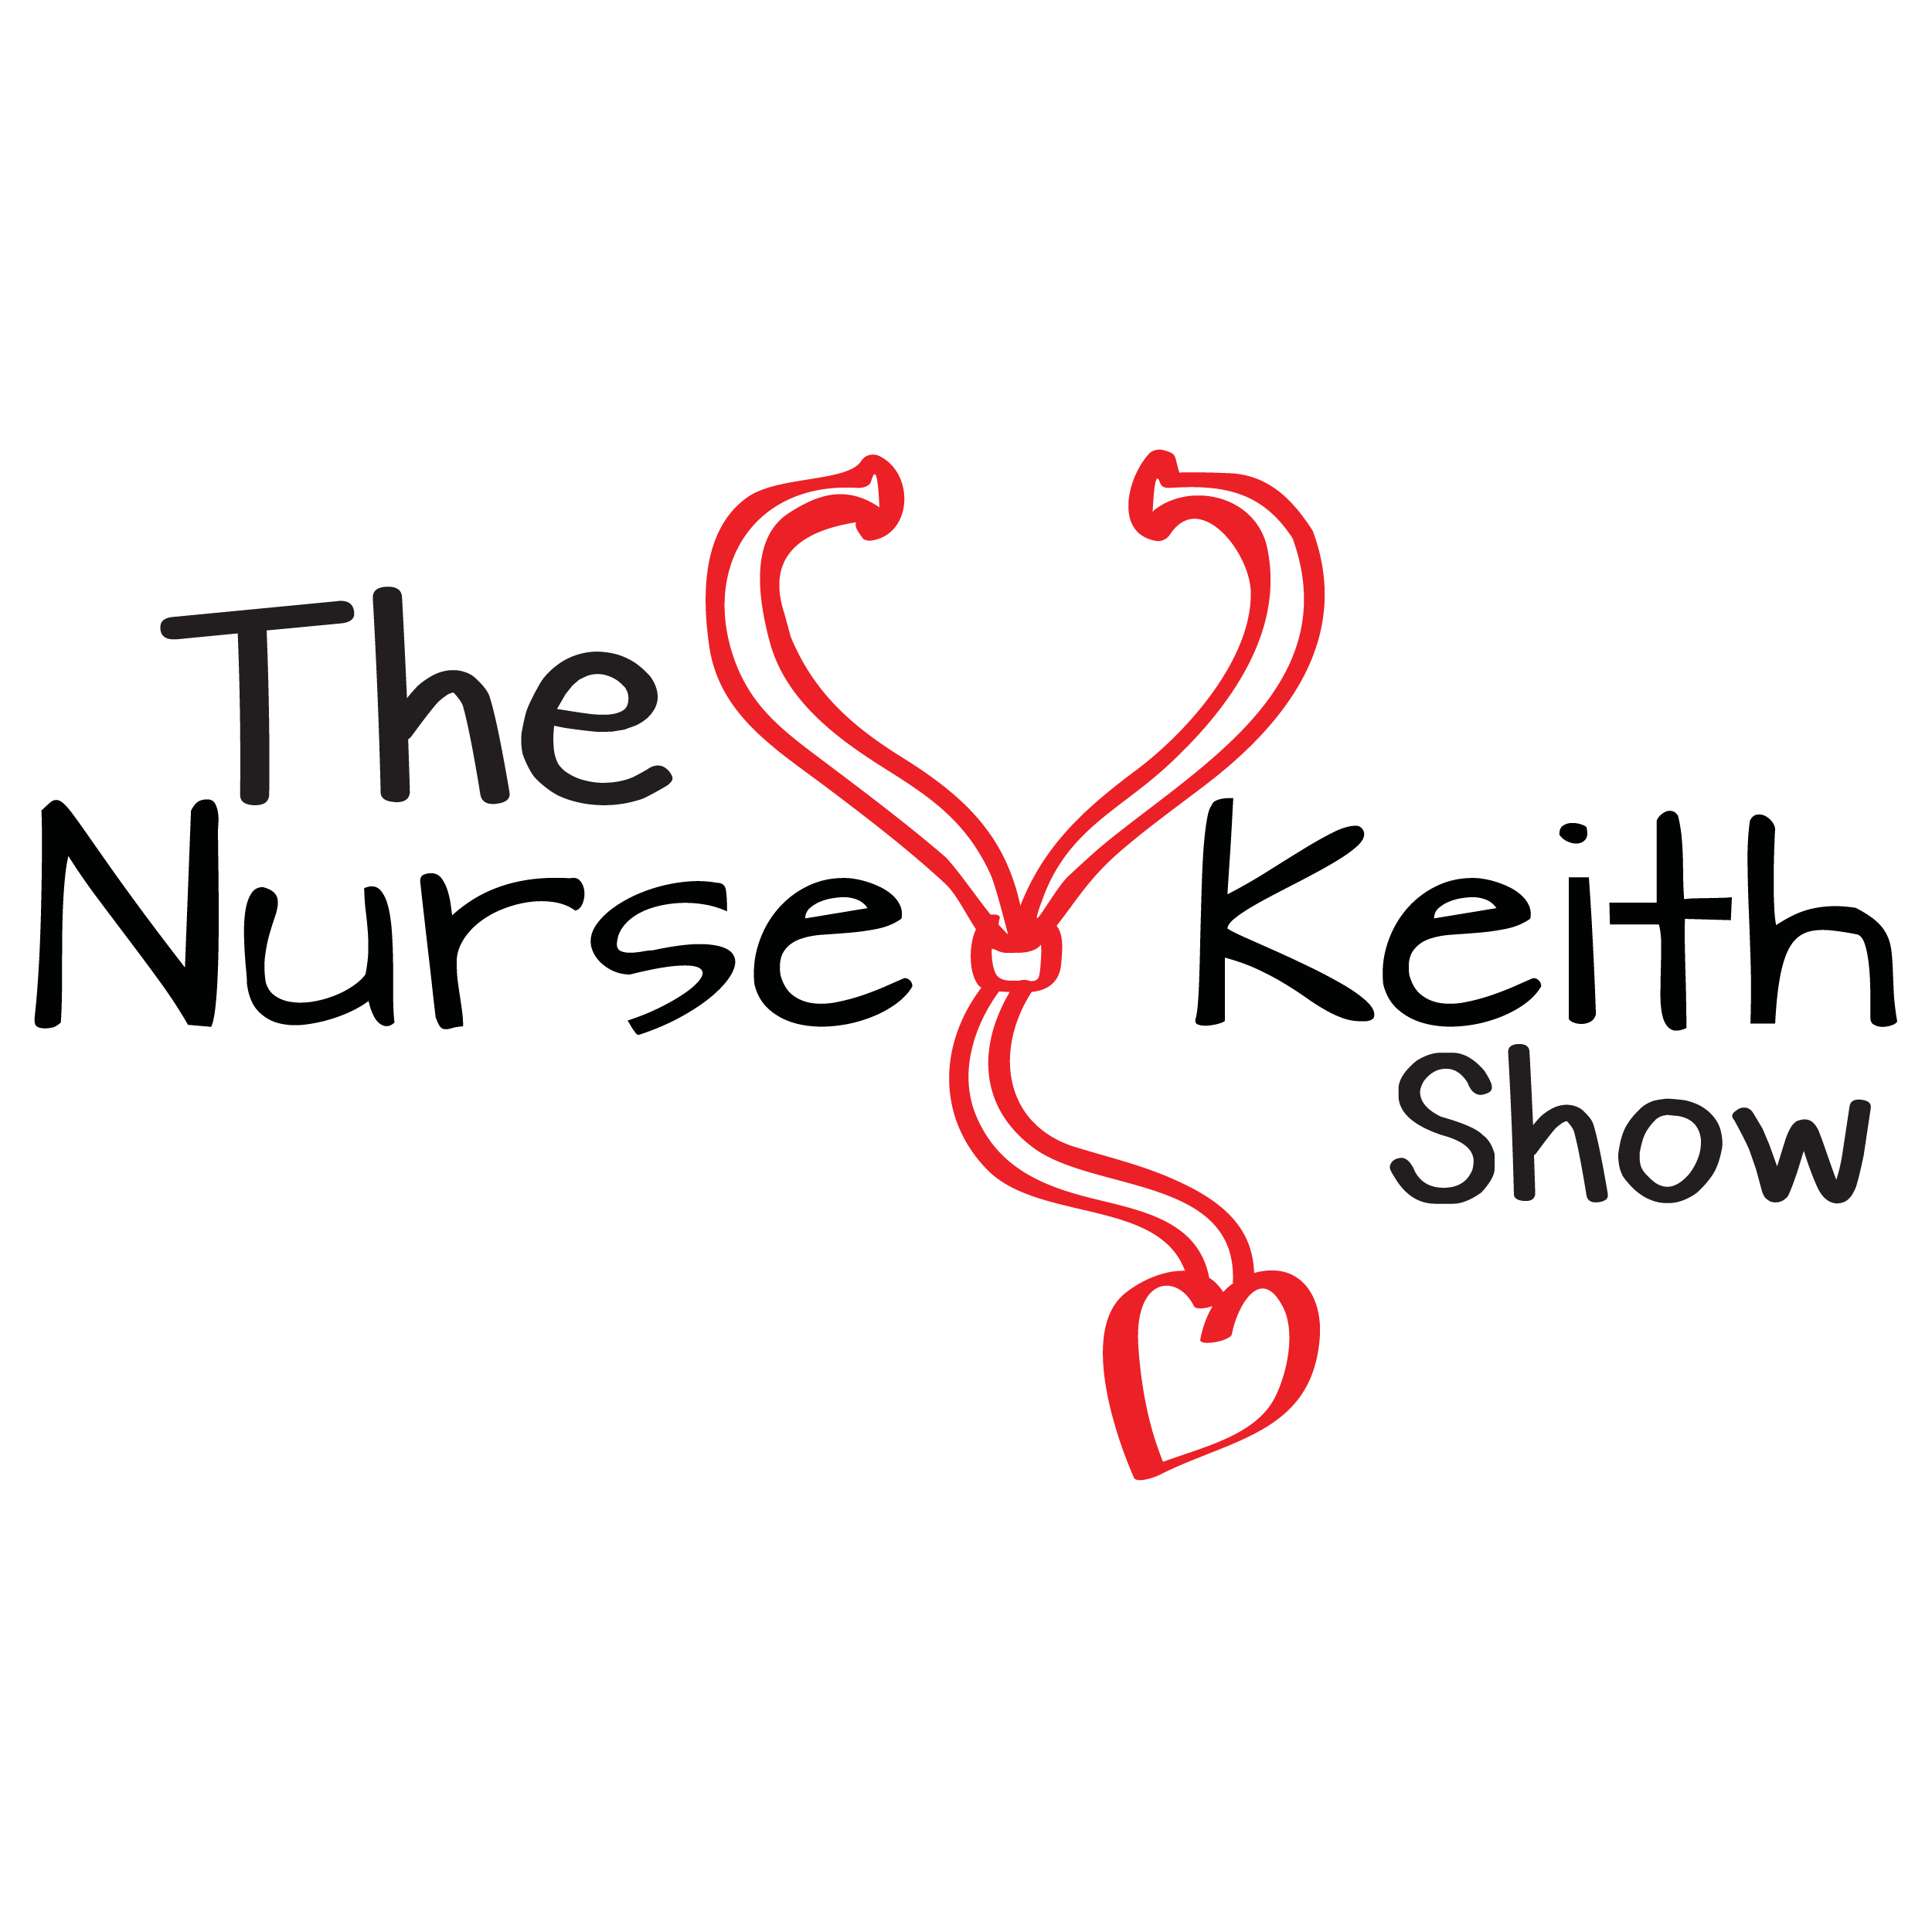 The Compassion Caravan of Nurses is Coming to Town |The Nurse Keith Show